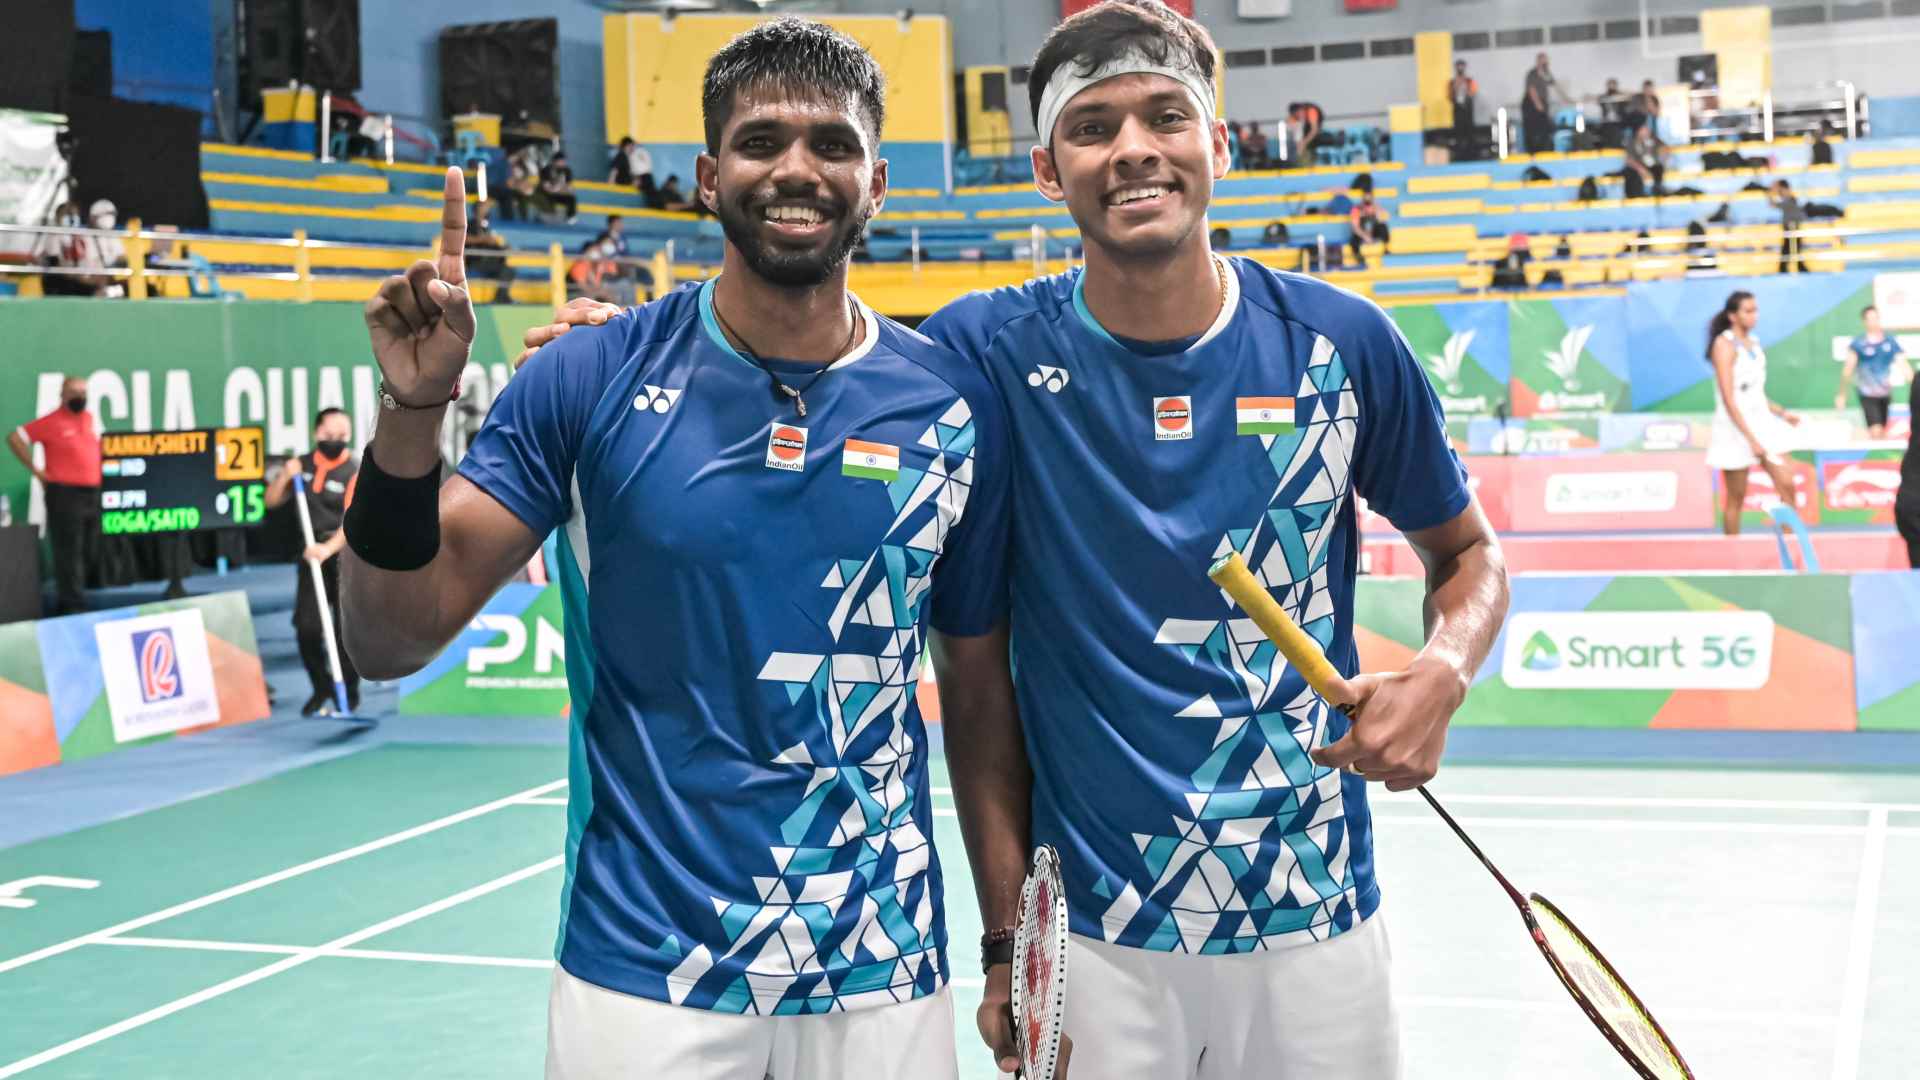 Indian Mens' Doubles pair Satwiksairaj Rankireddy(left) and Chirag Shetty(right); Credit: Twitter/@Badminton_Asia